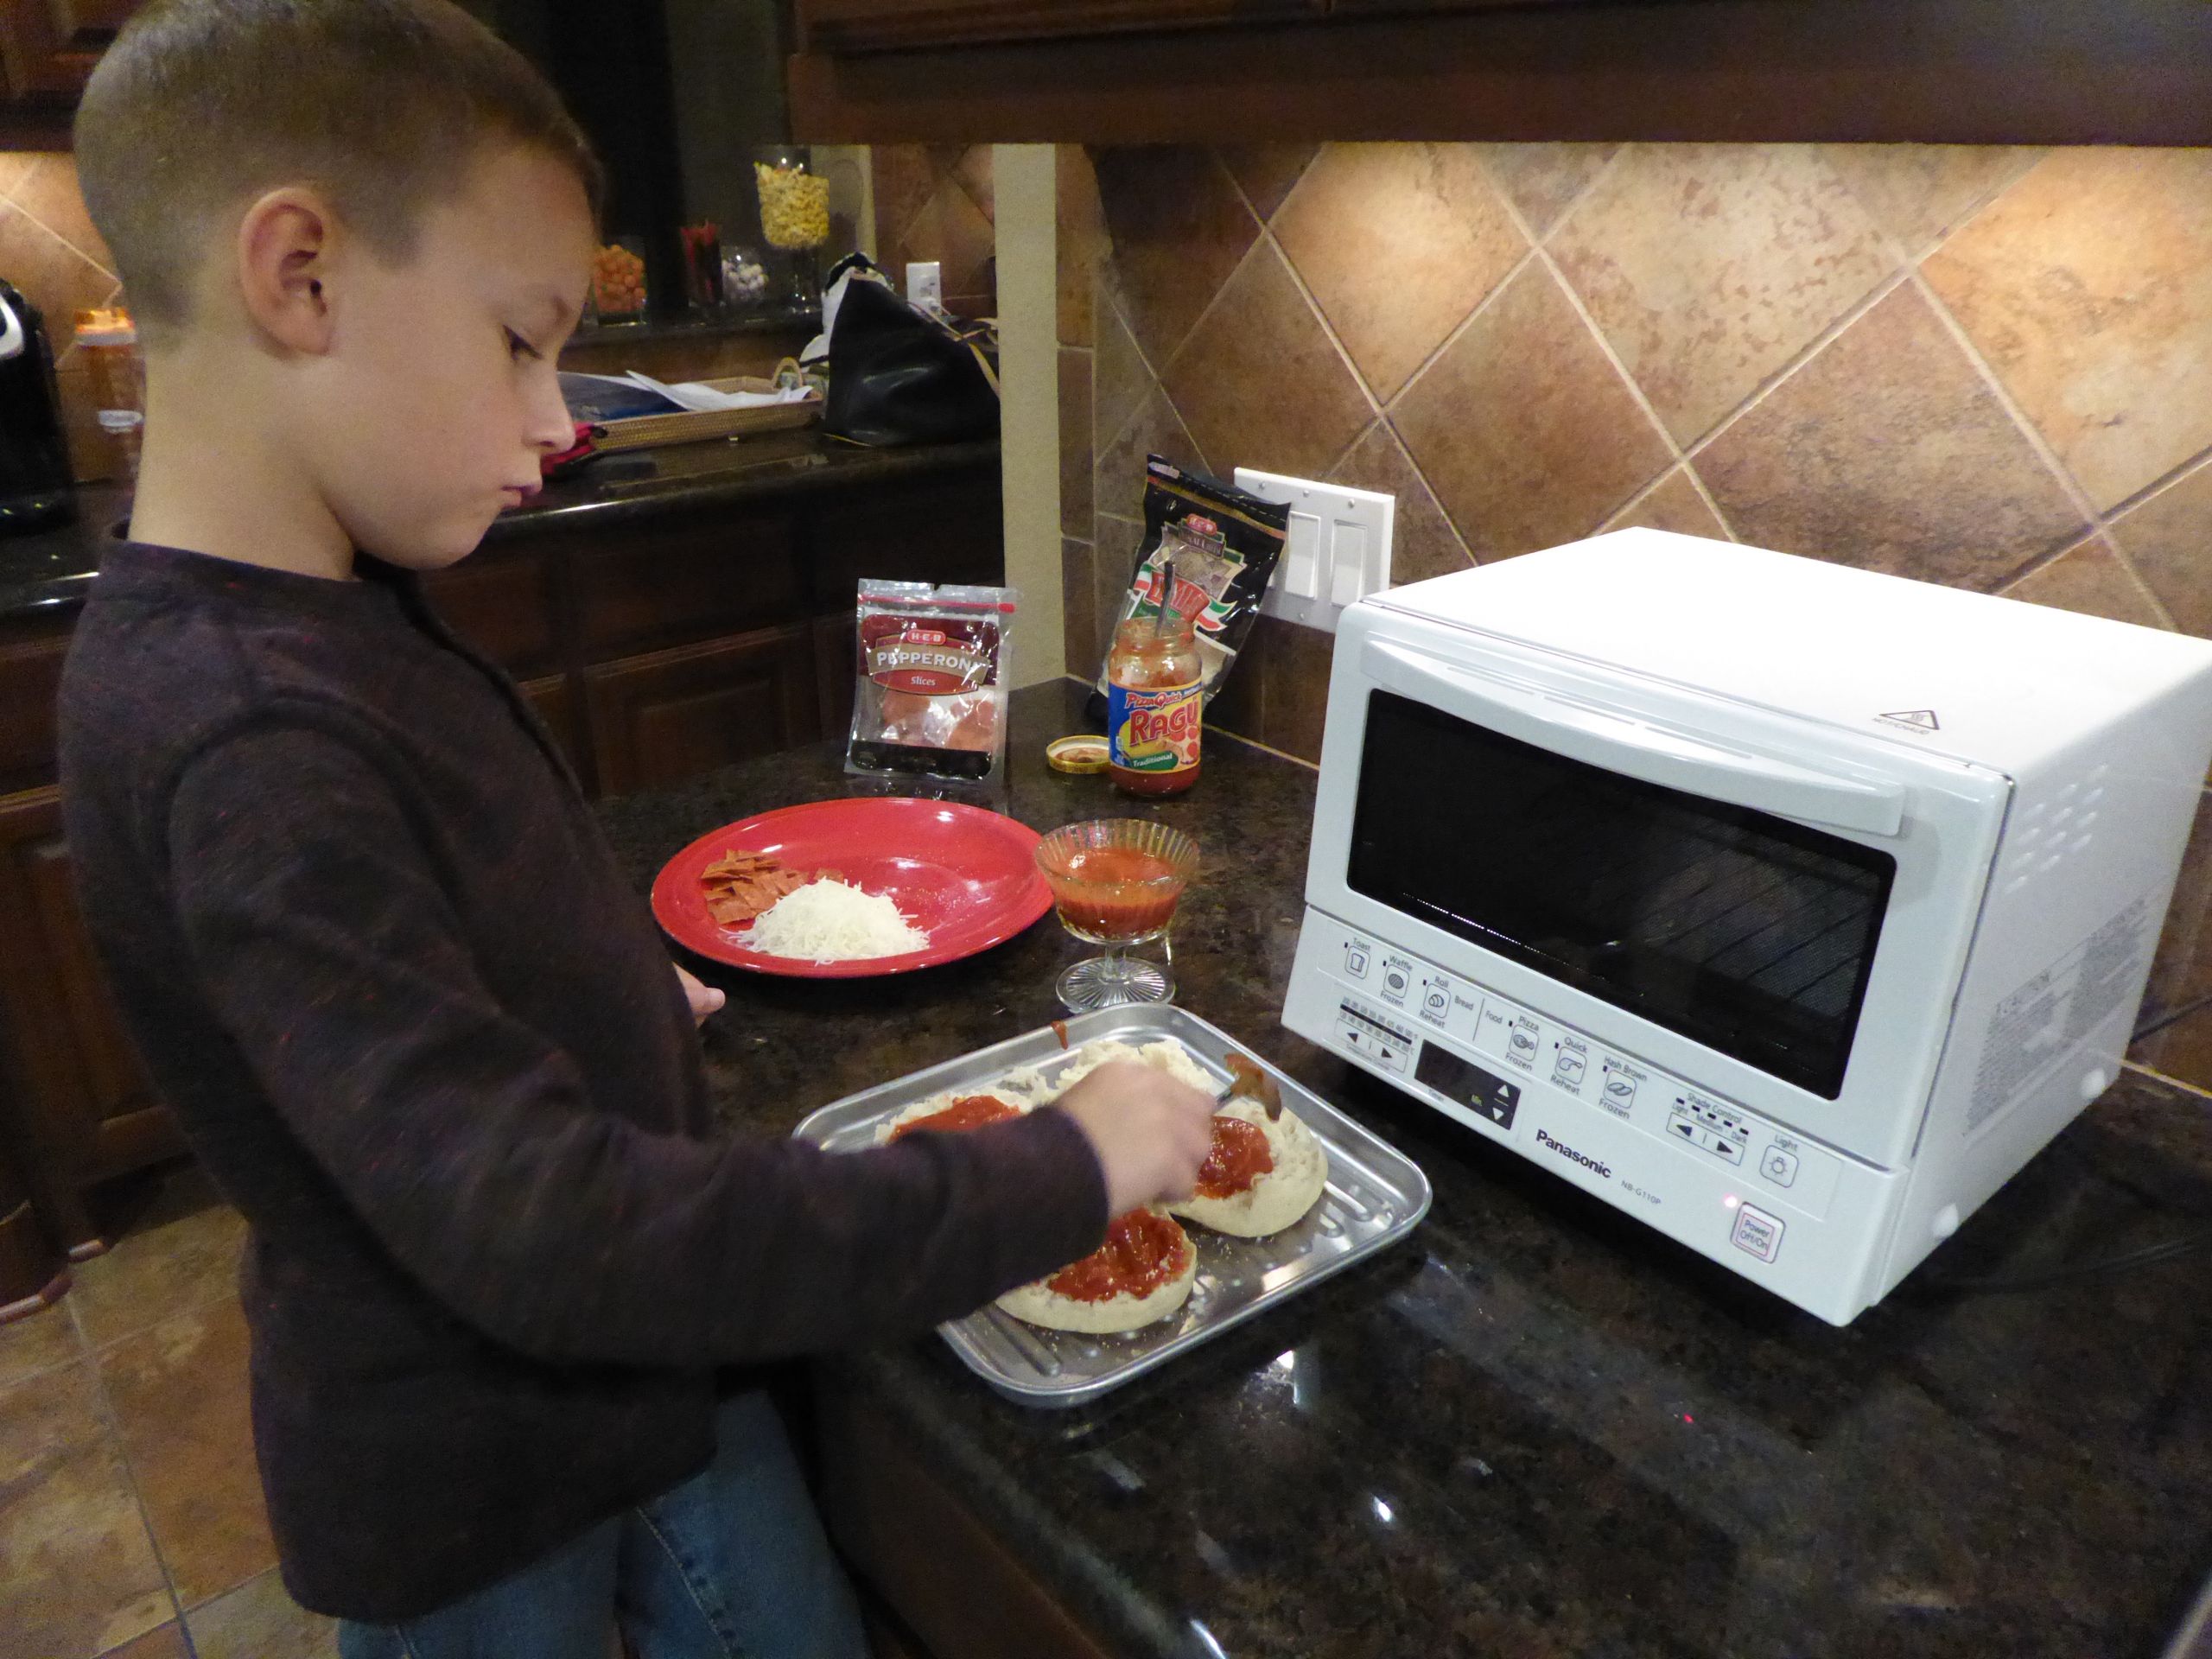 Toaster Oven Recipes For Kids
 Panasonic FlashXpress Toaster Oven Kids Challenge